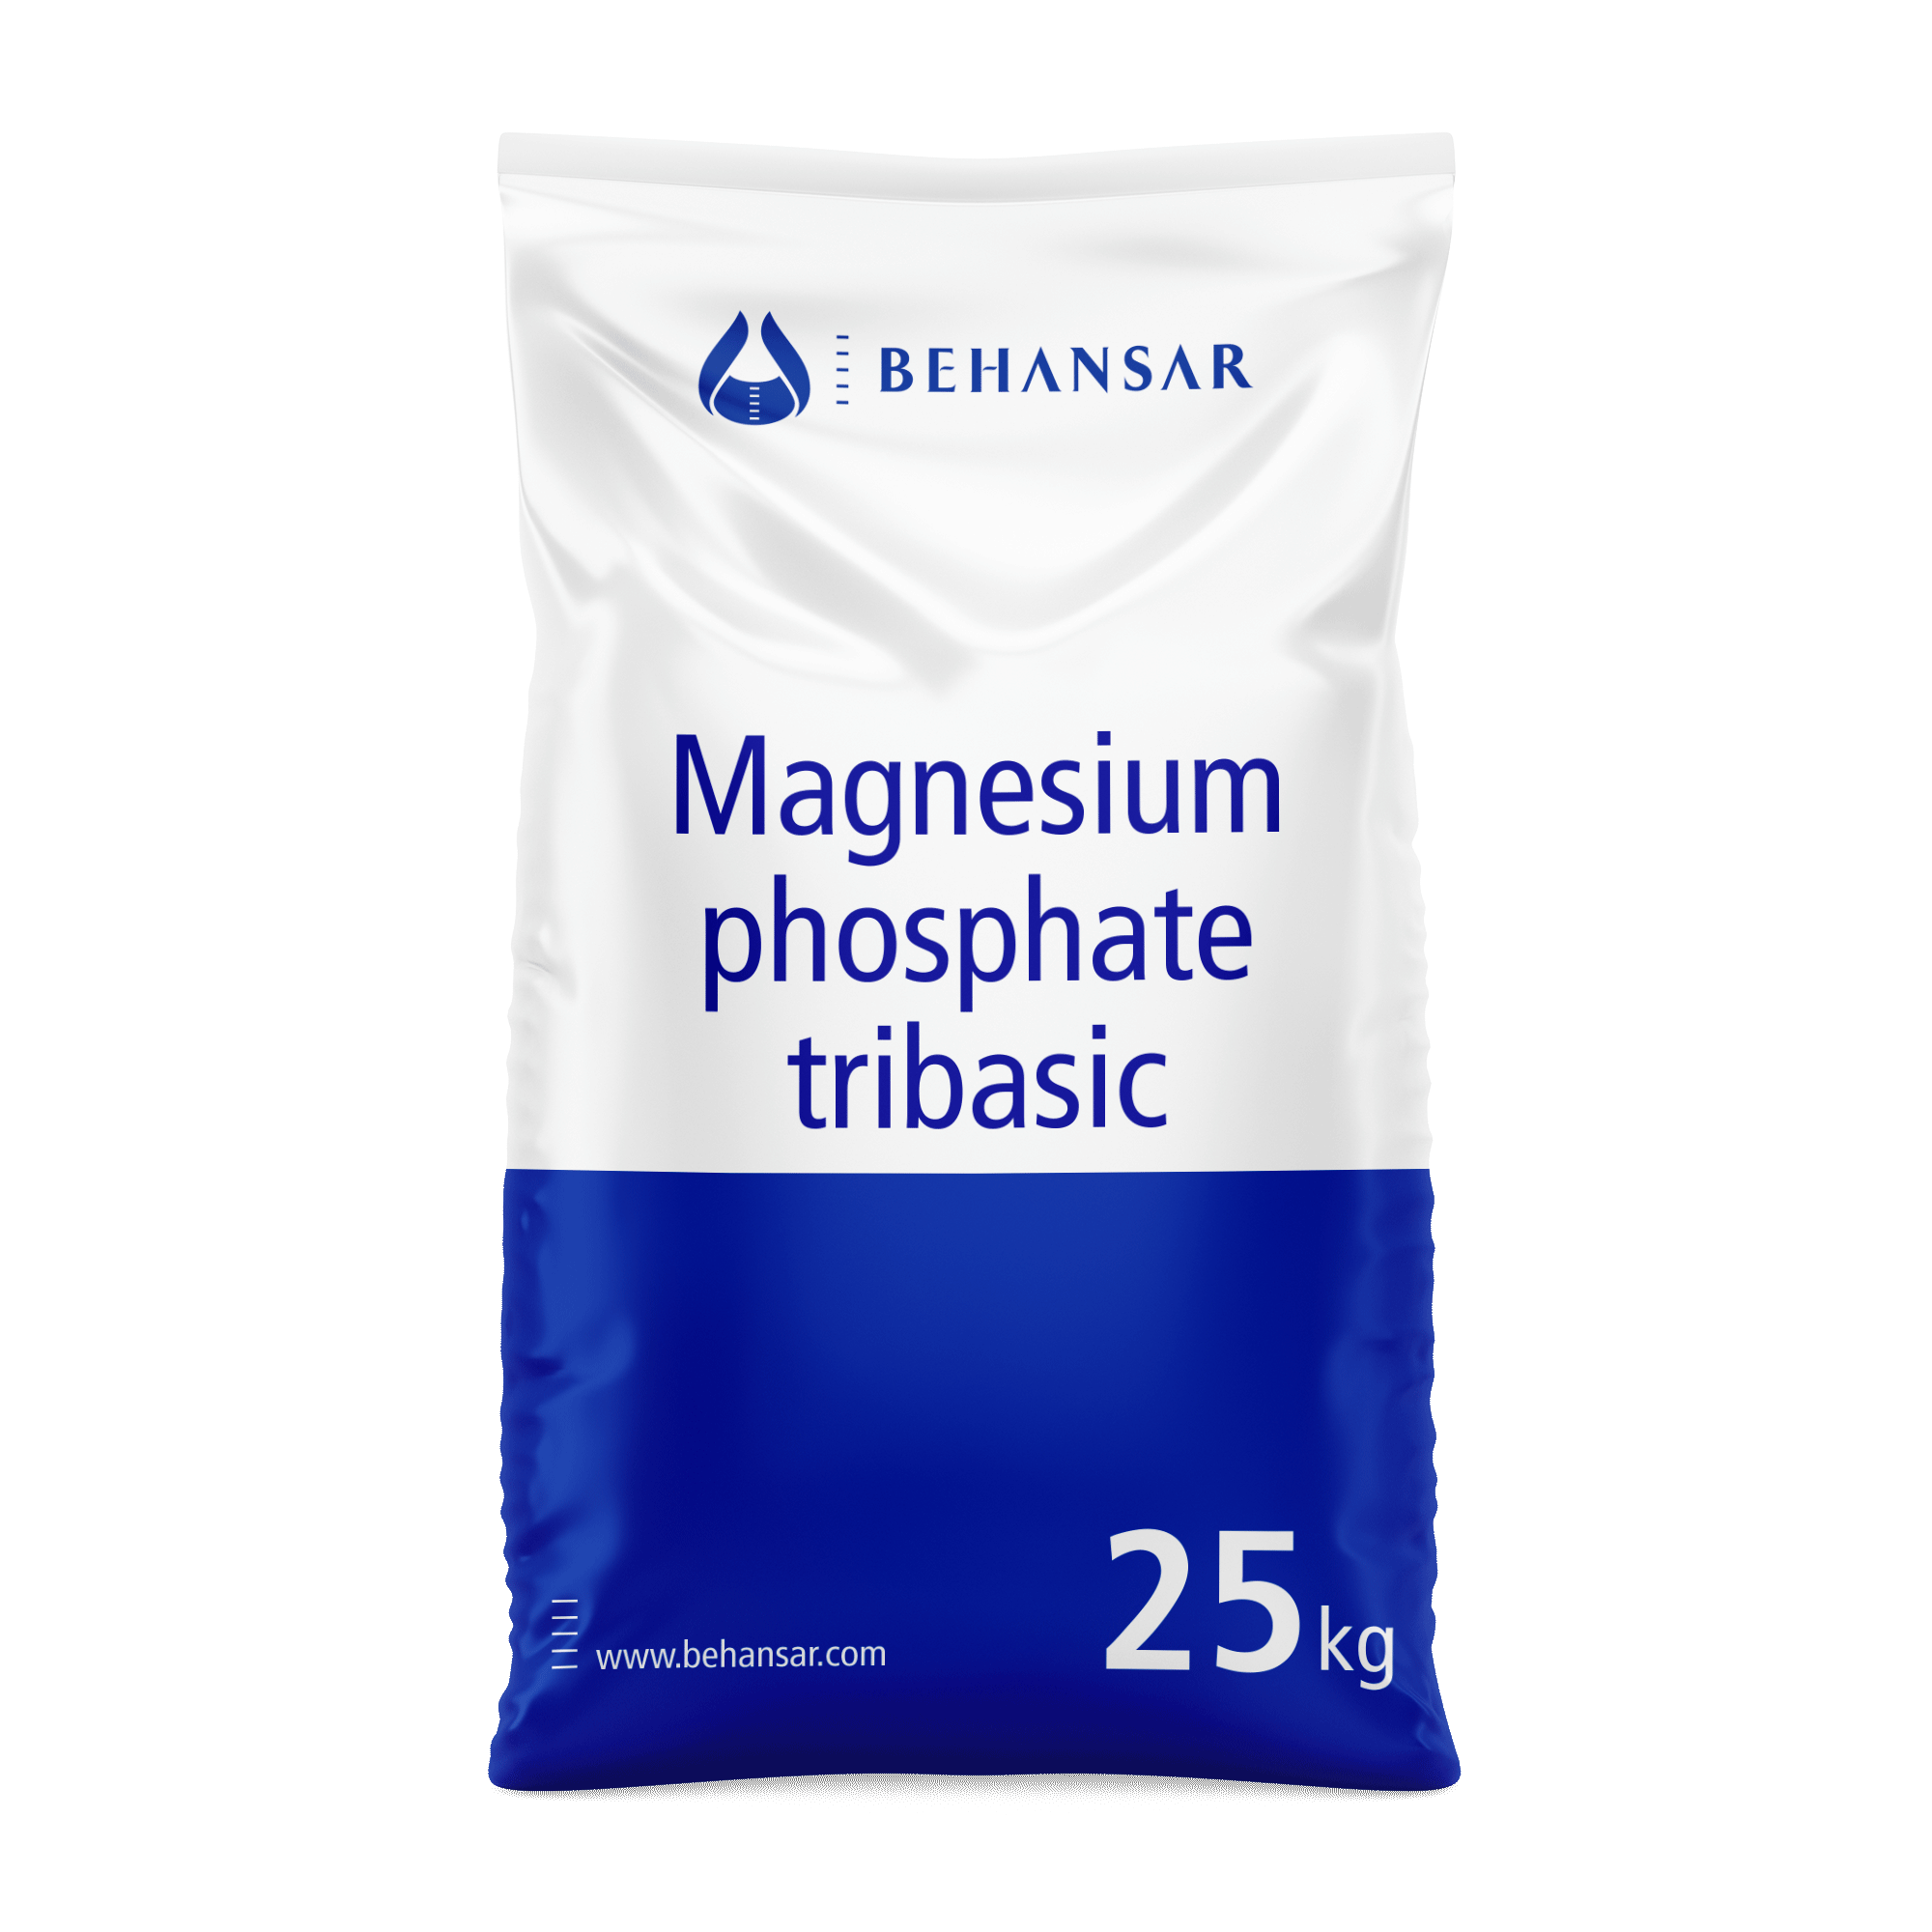 Magnesium phosphate tribasic is one of the products of Behansar Co